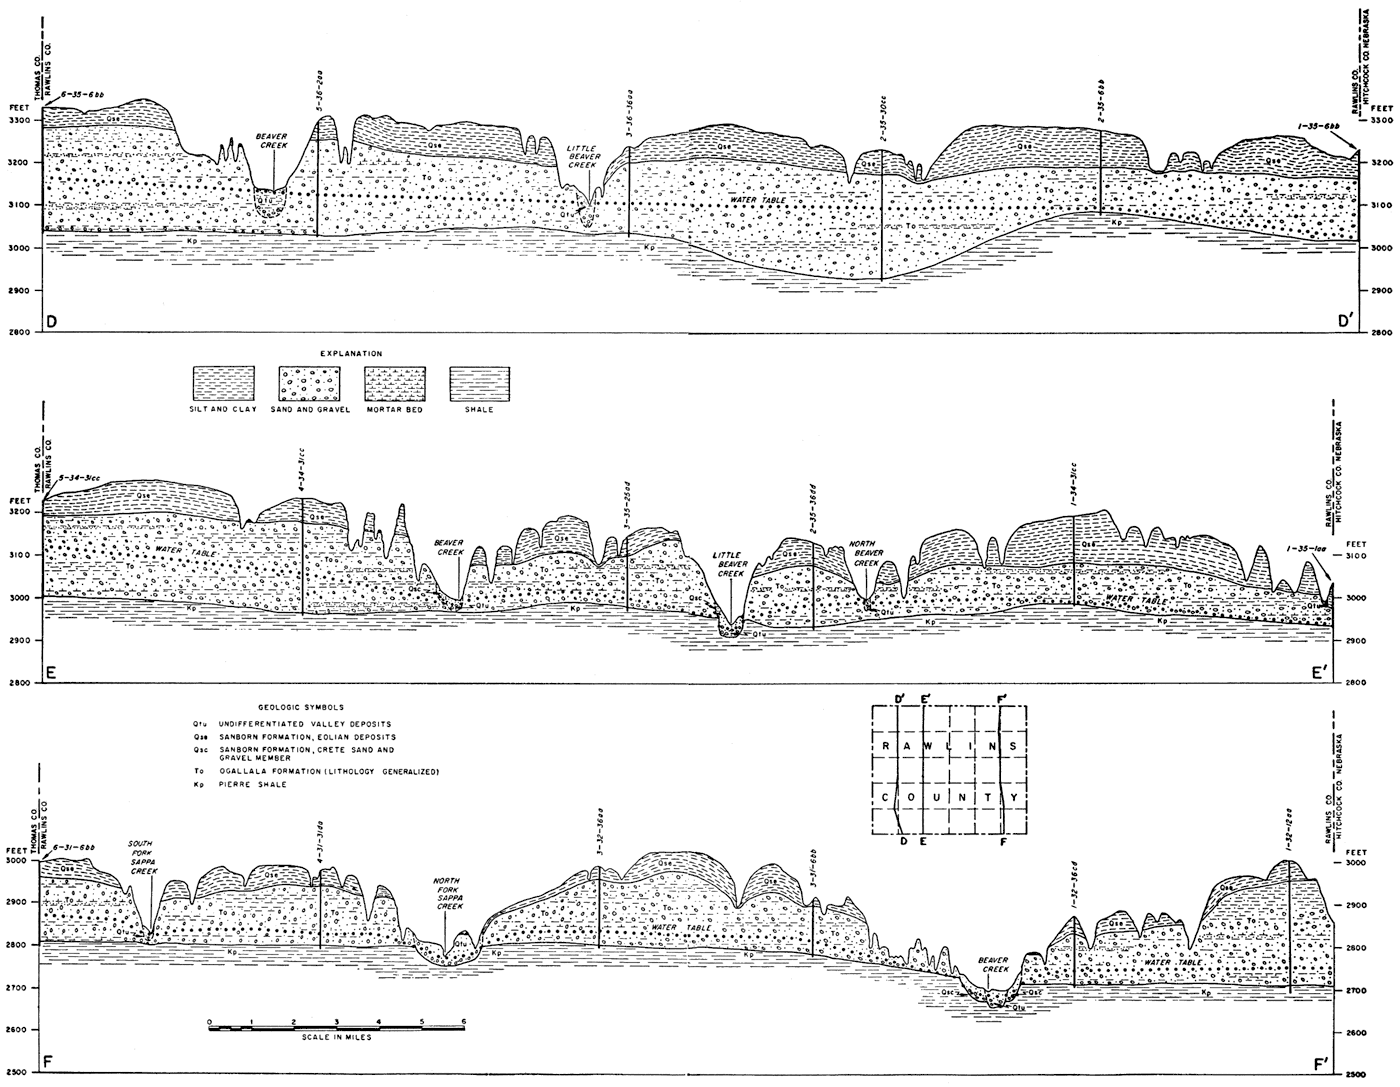 Three north-south cross sections; sand and gravel layers between top silt and clay and Pierre shale; mortar bed appears in southern part of eastern section above the sand and below the silt and clay layer.